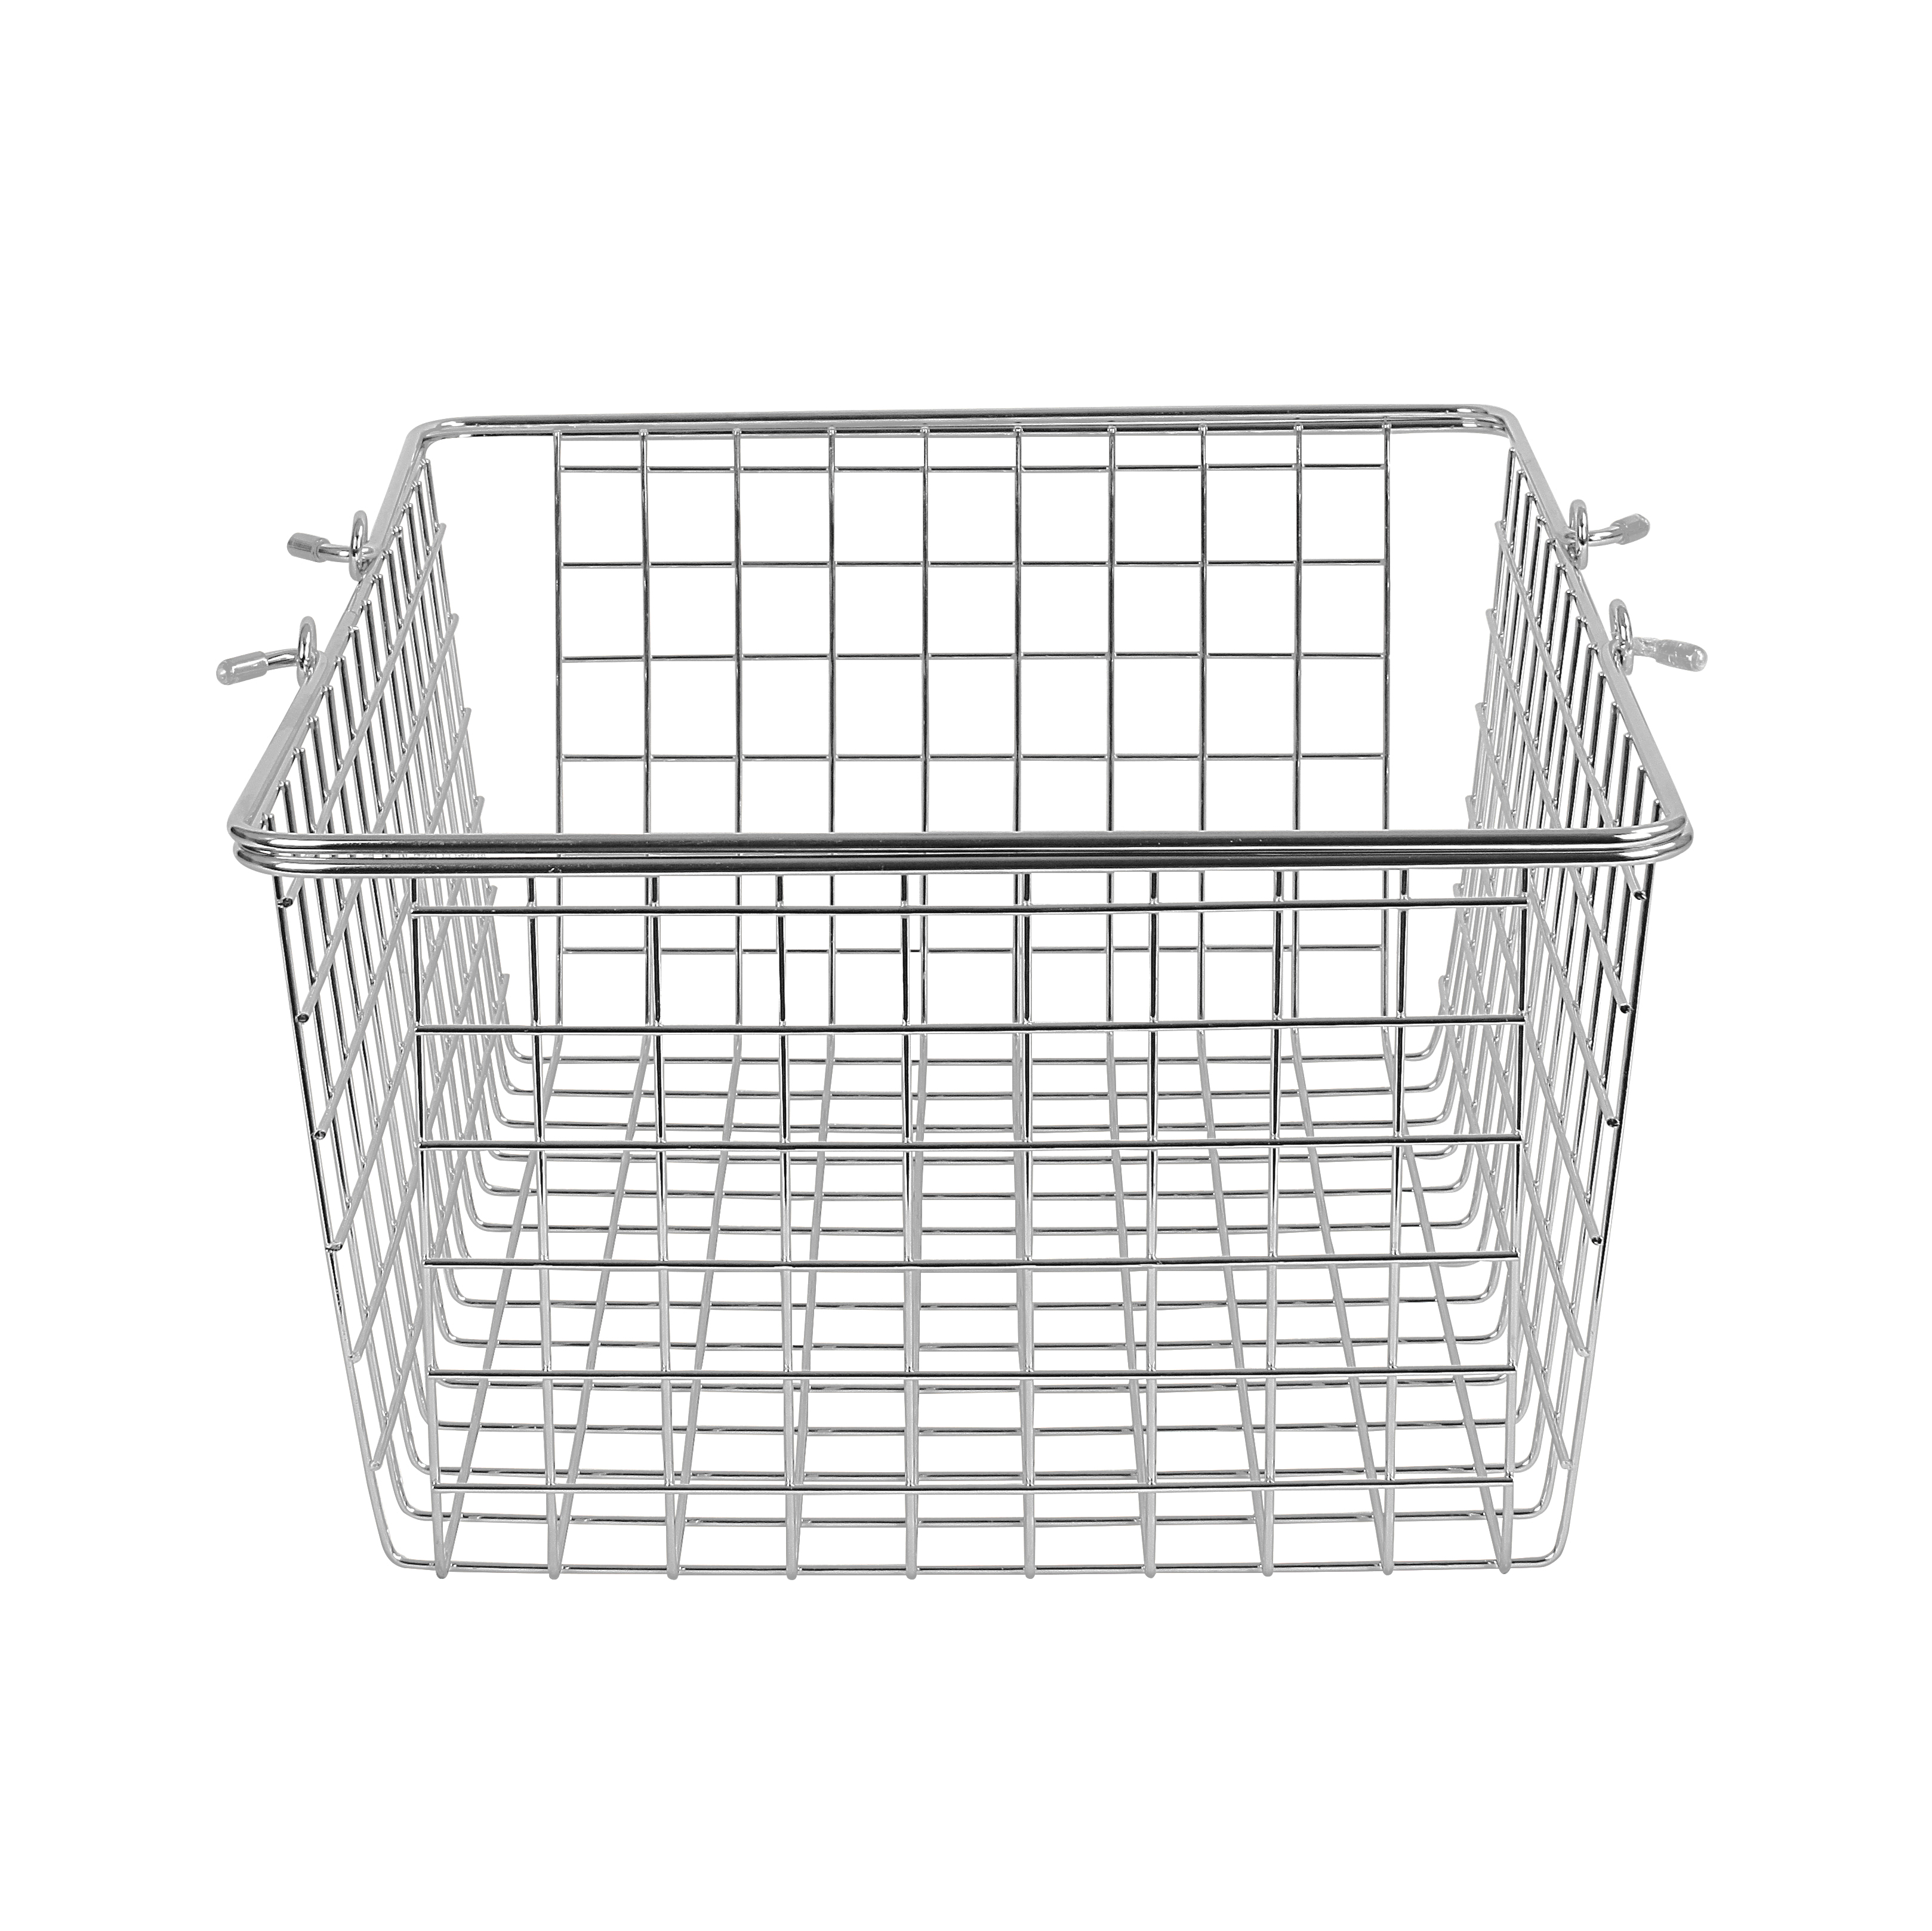 Spectrum Diversified Steel Wire Storage Basket with Handles for Pantry, Countertop and More, Large, Chrome - image 3 of 13